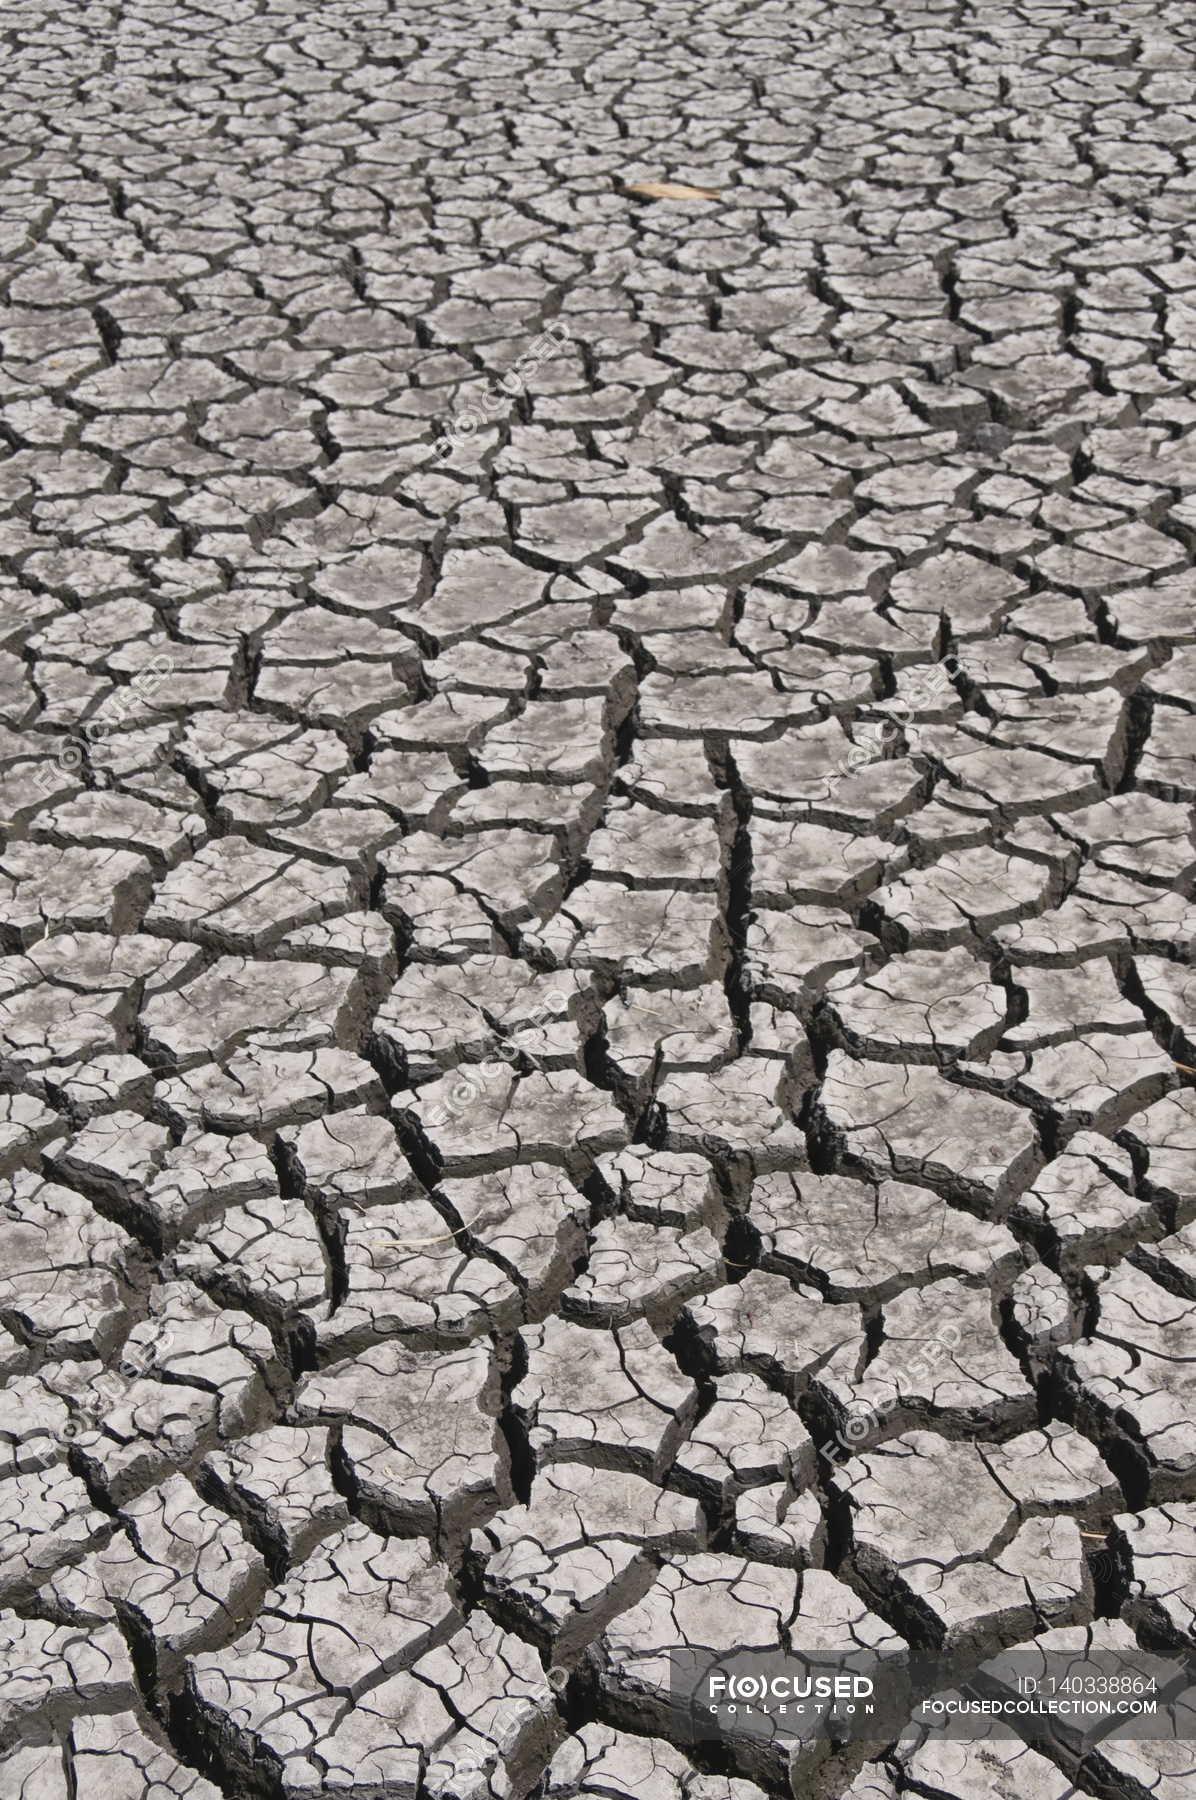 Cracked river bed in drought — Stock Photo | #140338864